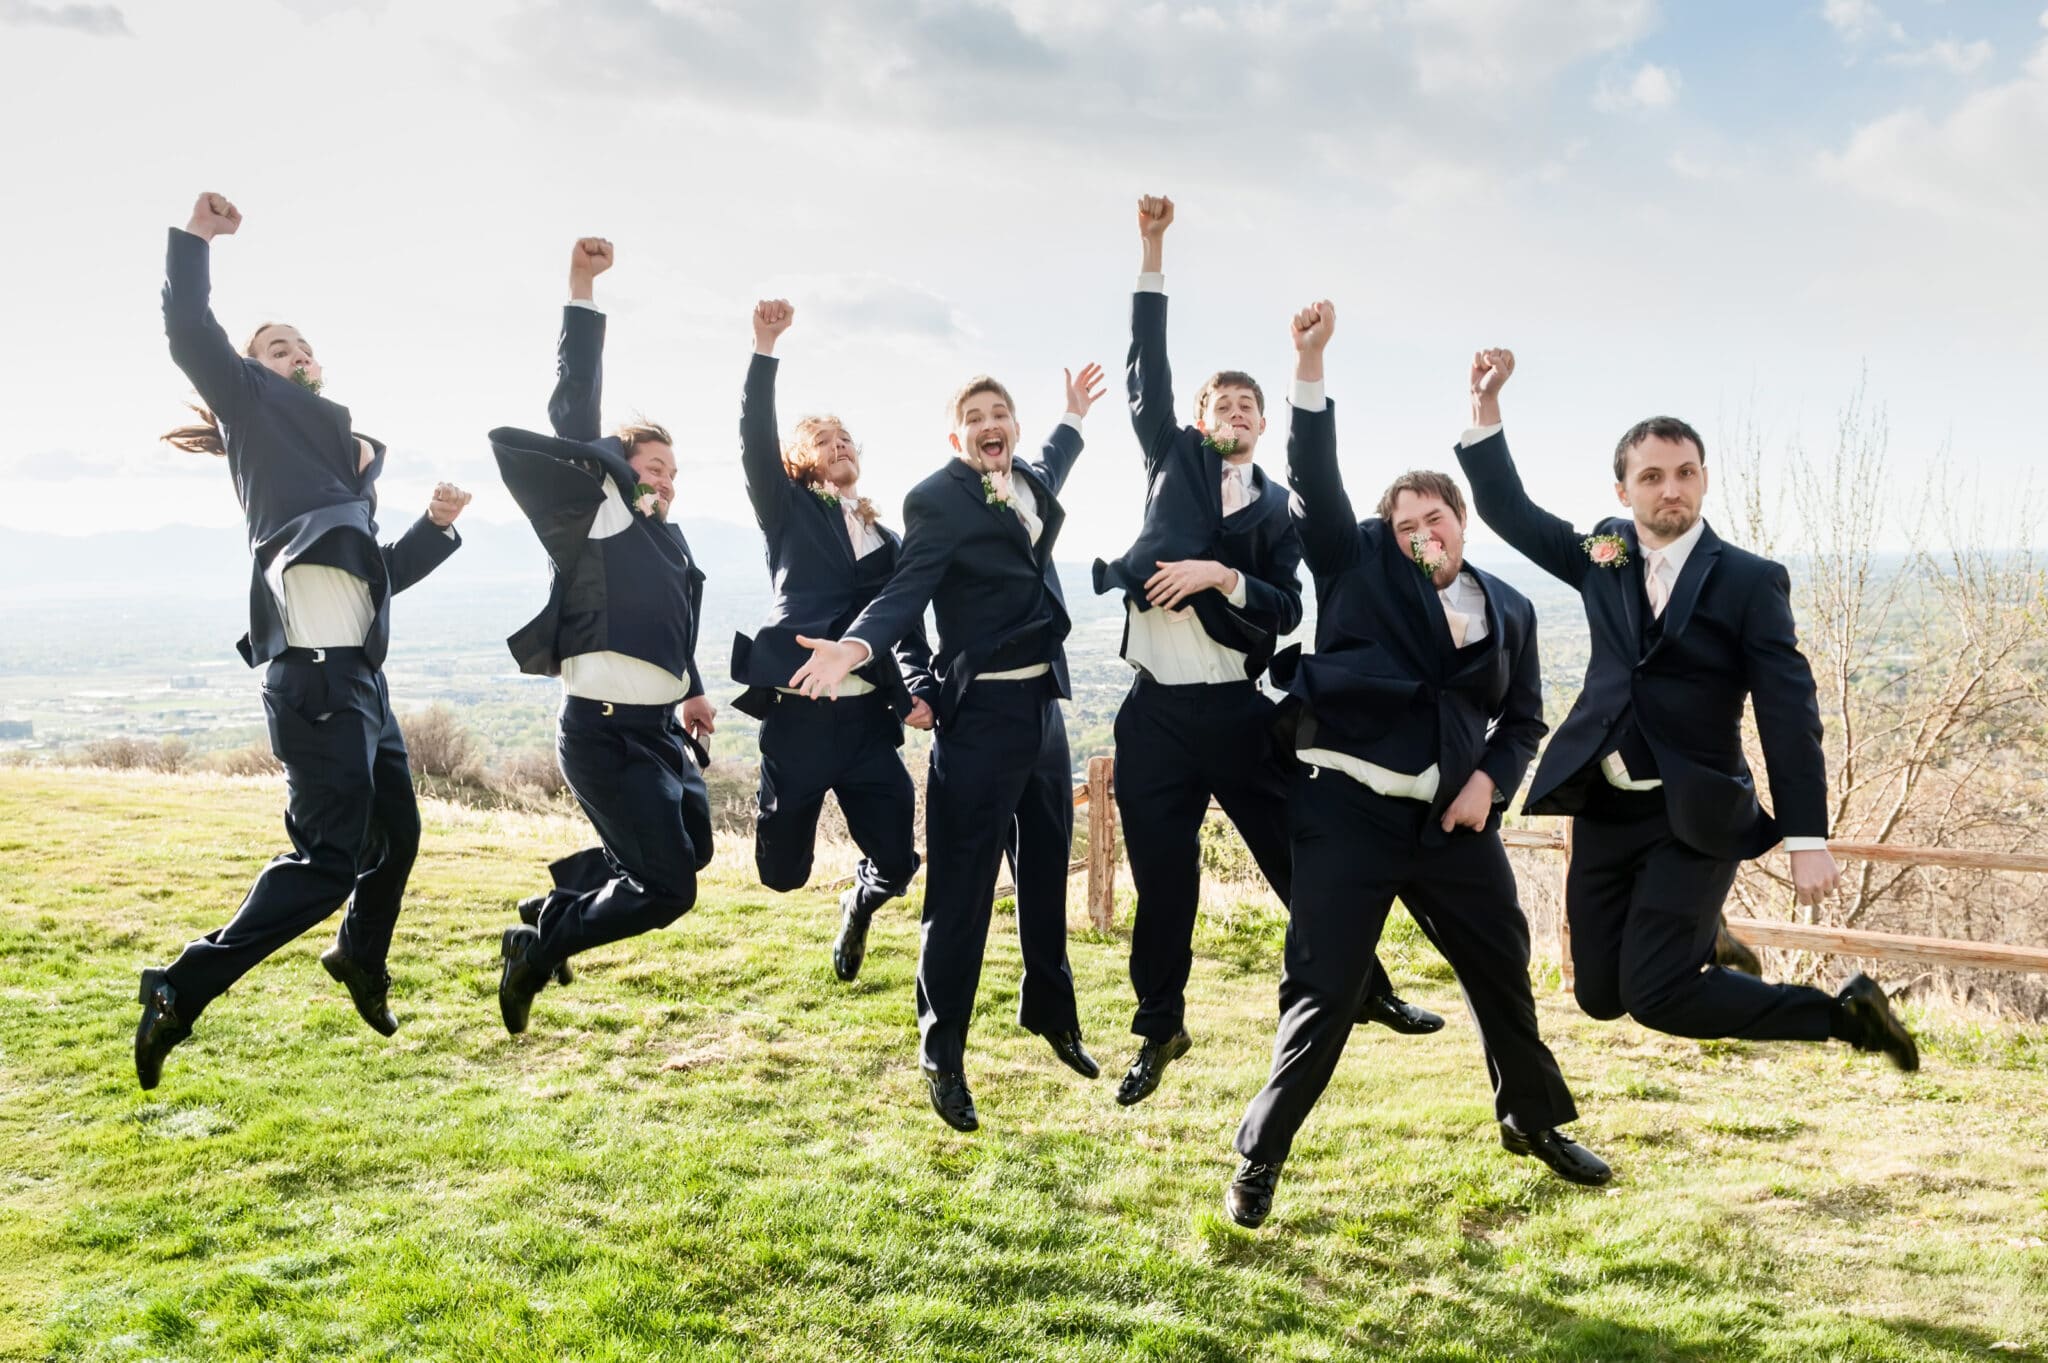 Jumping groom and groomsmen at an outdoor wedding at a golf course.